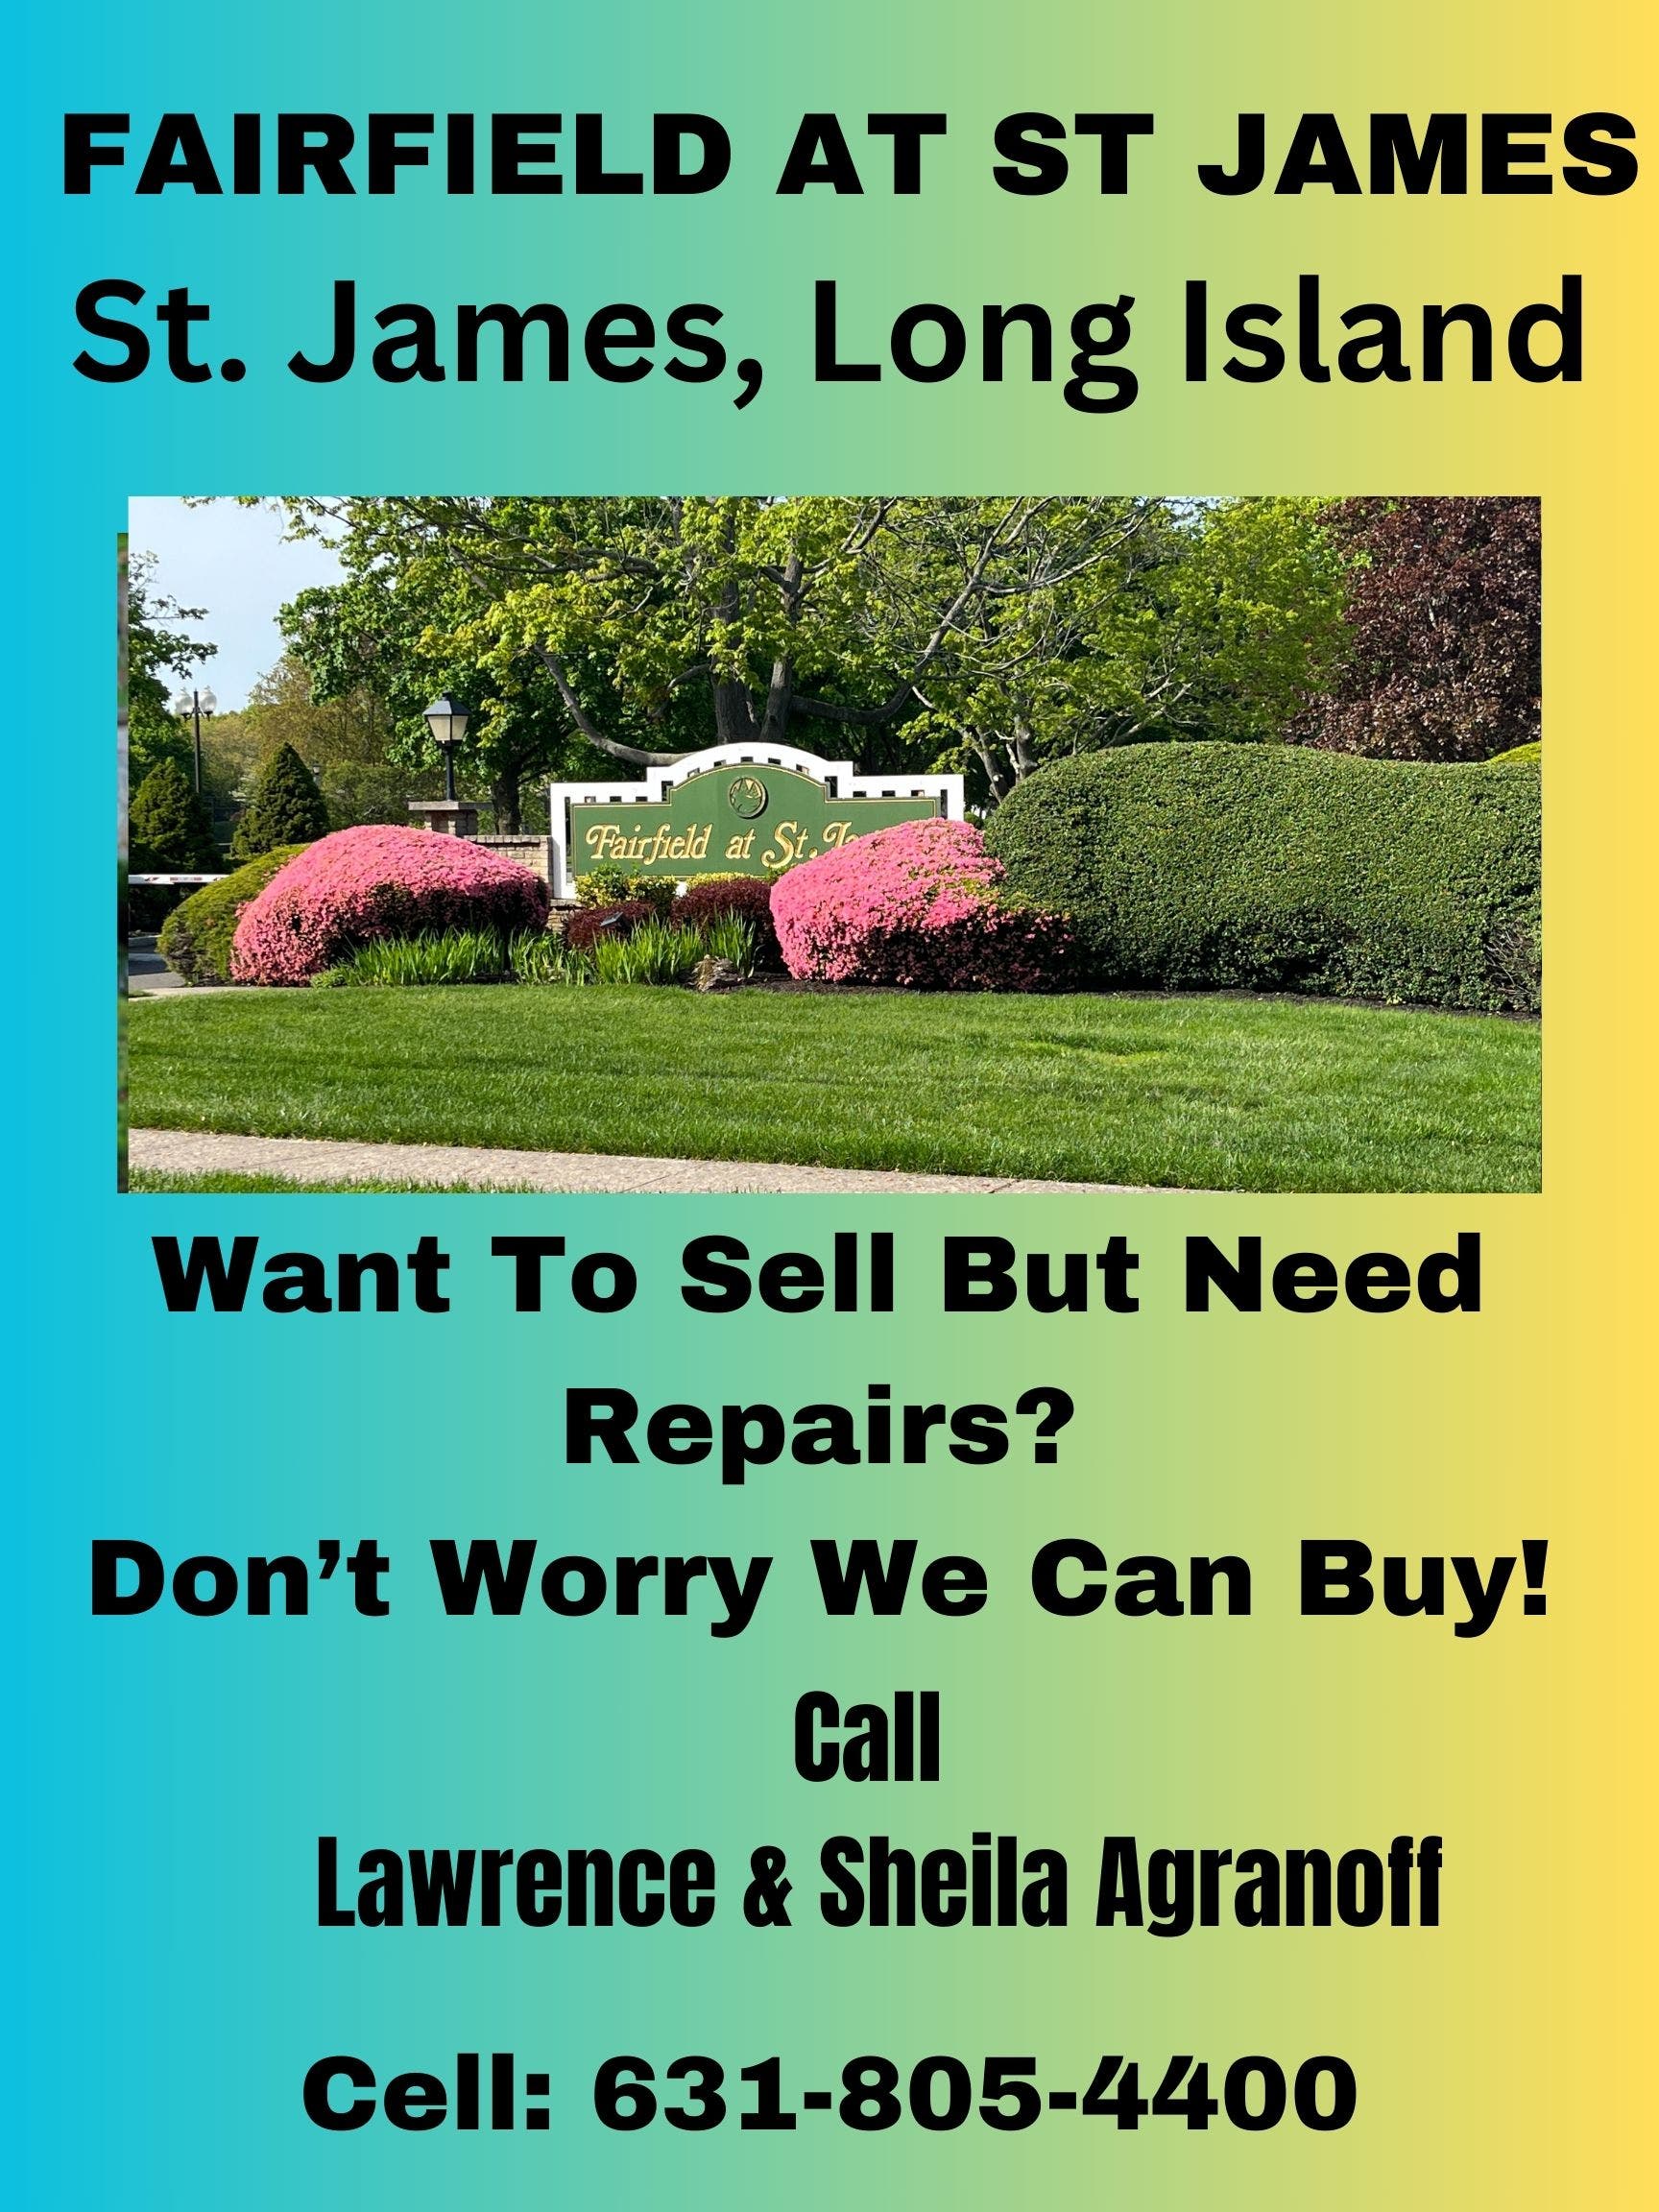 Fairfield At St. James Owners Sell Your Long Island Condo Stress-Free: No Repairs Needed